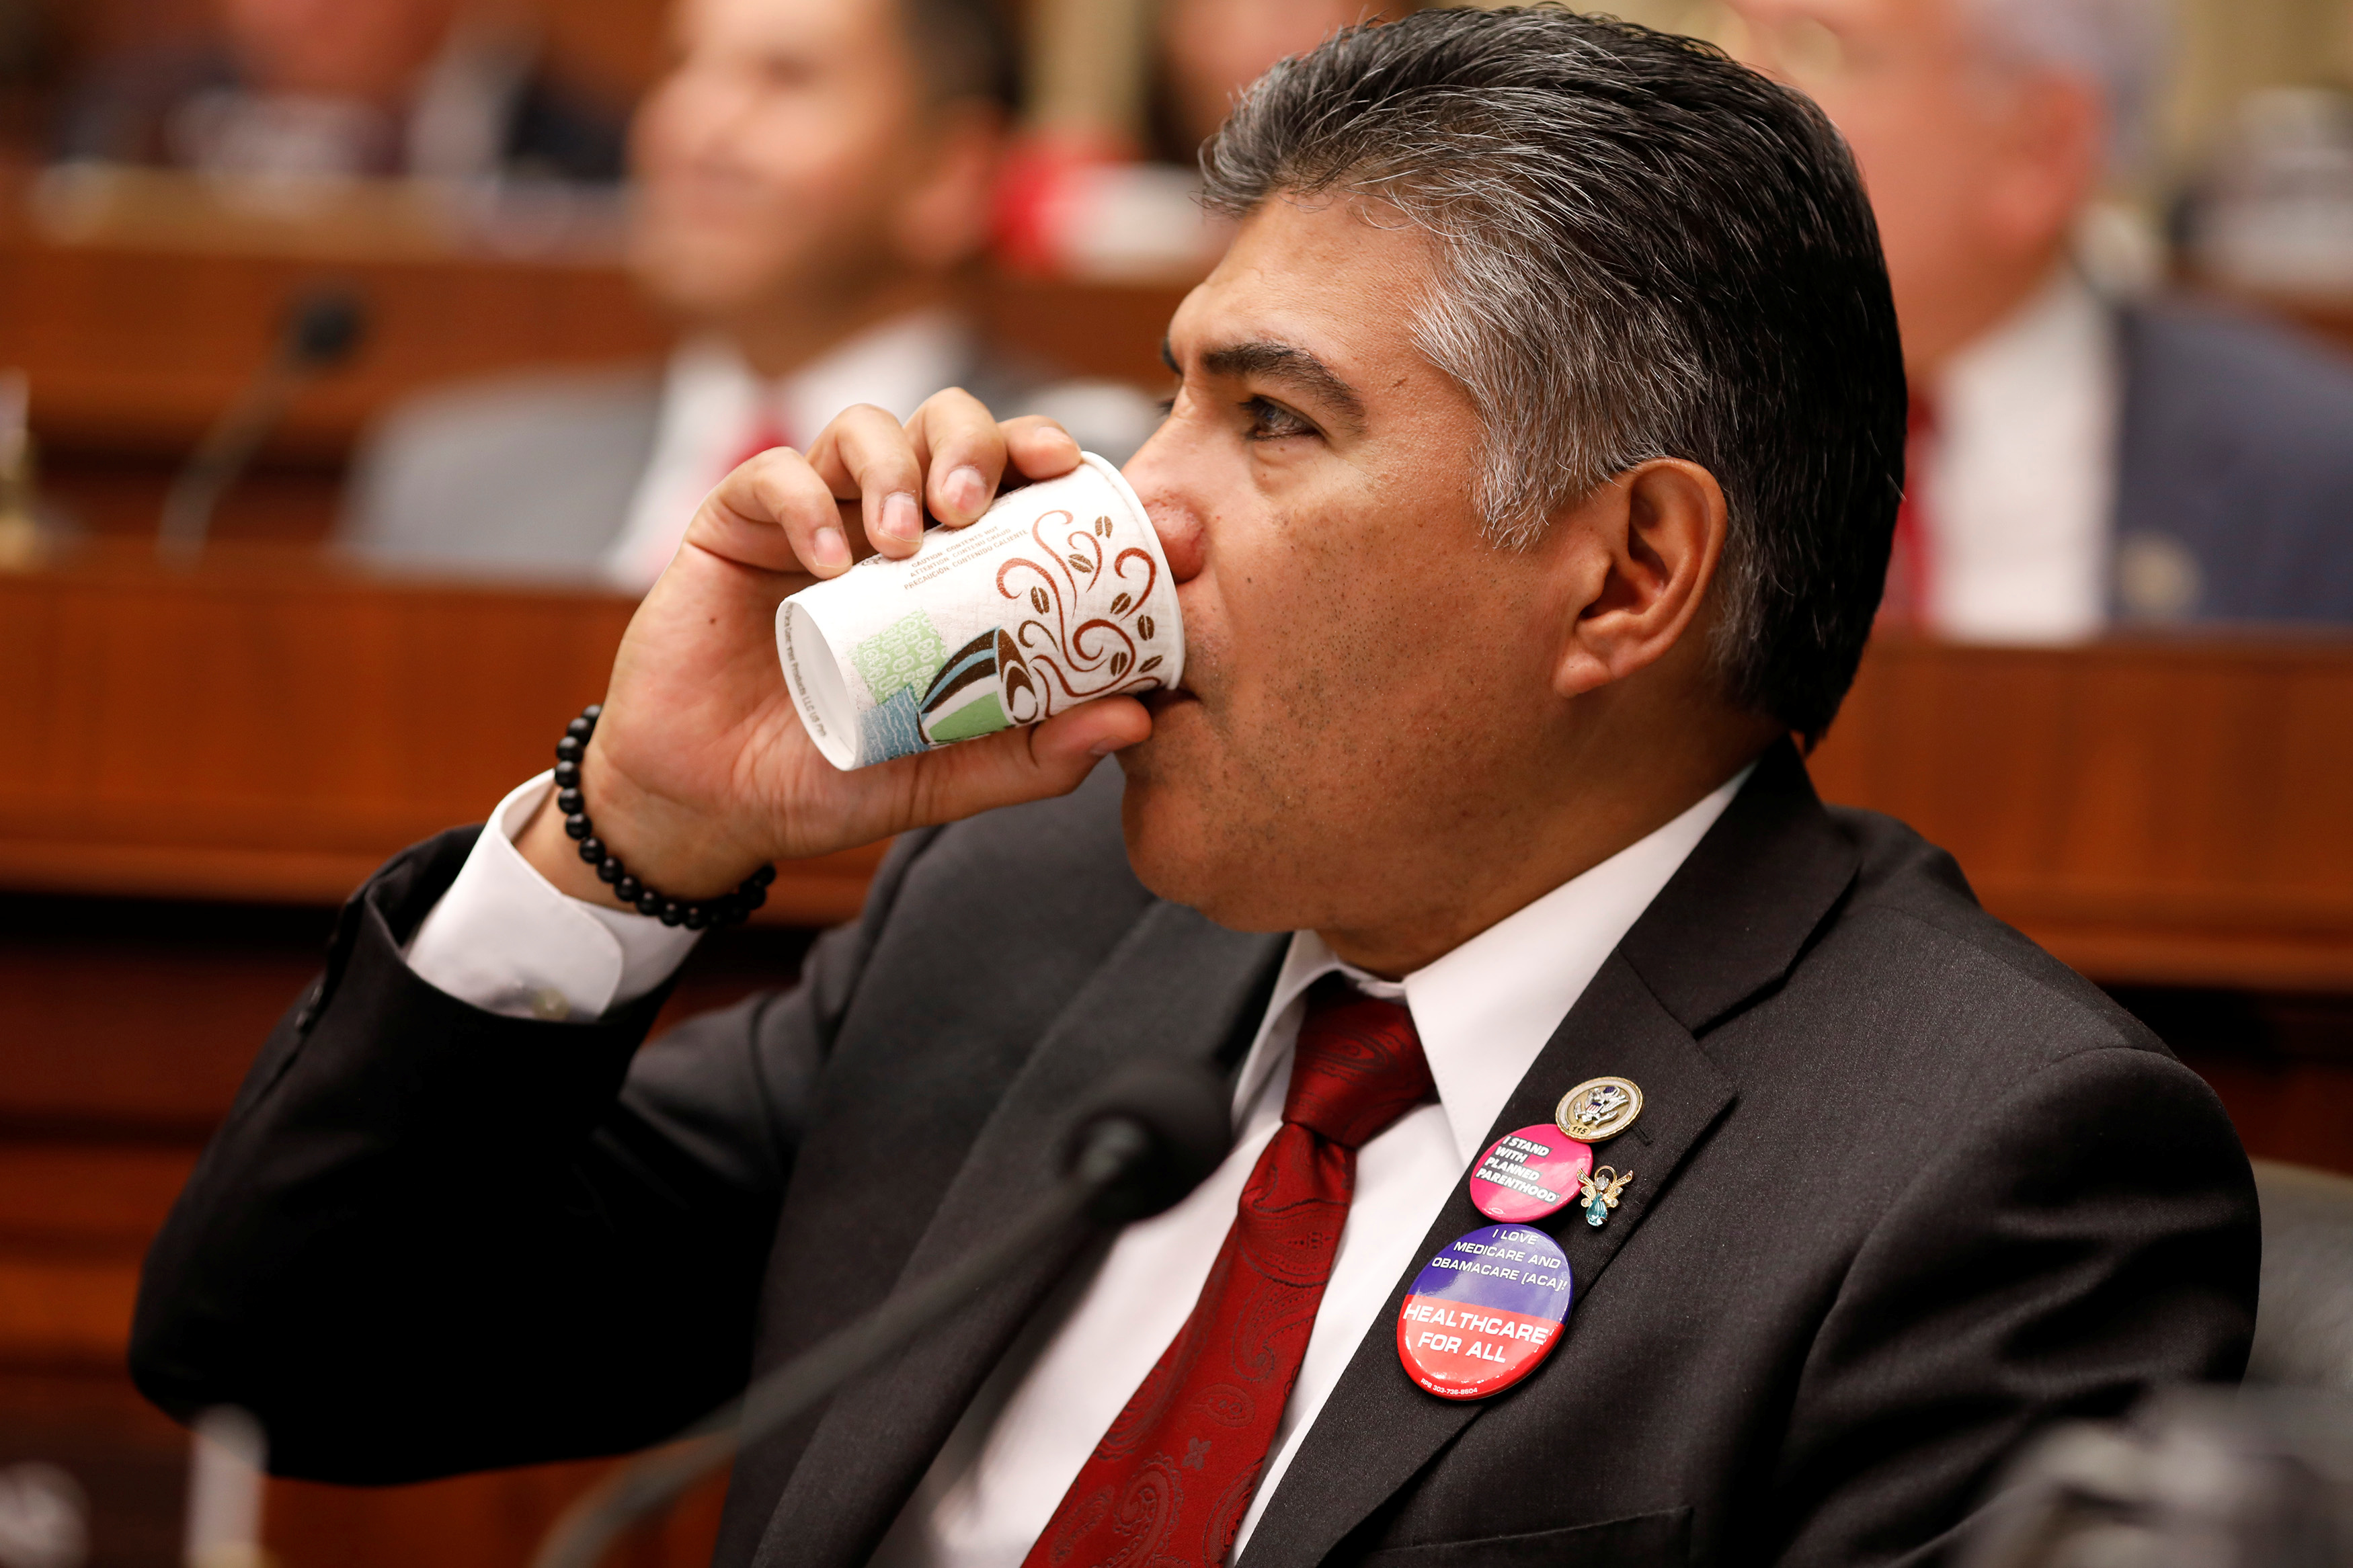 Rep. Tony Cardenas (D-CA) drinks coffee during a marathon House Energy and Commerce Committee hearing on a potential replacement for the Affordable Care Act